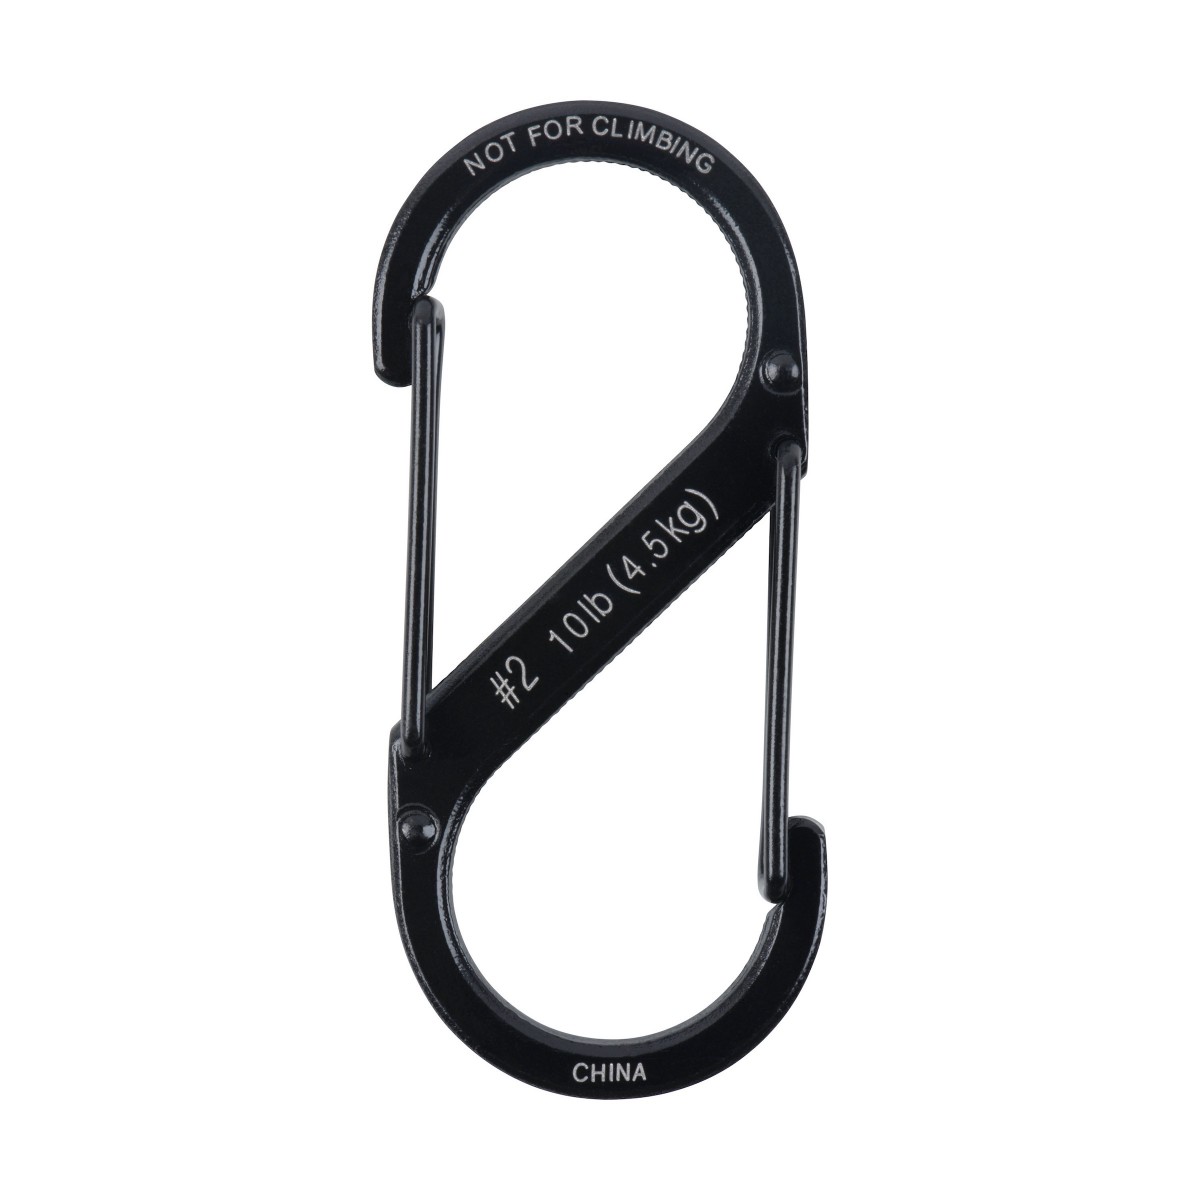 Black Nite Ize Unisexs Plastic S-biner Dual Carabiner Stainless Steel #5 Size 5